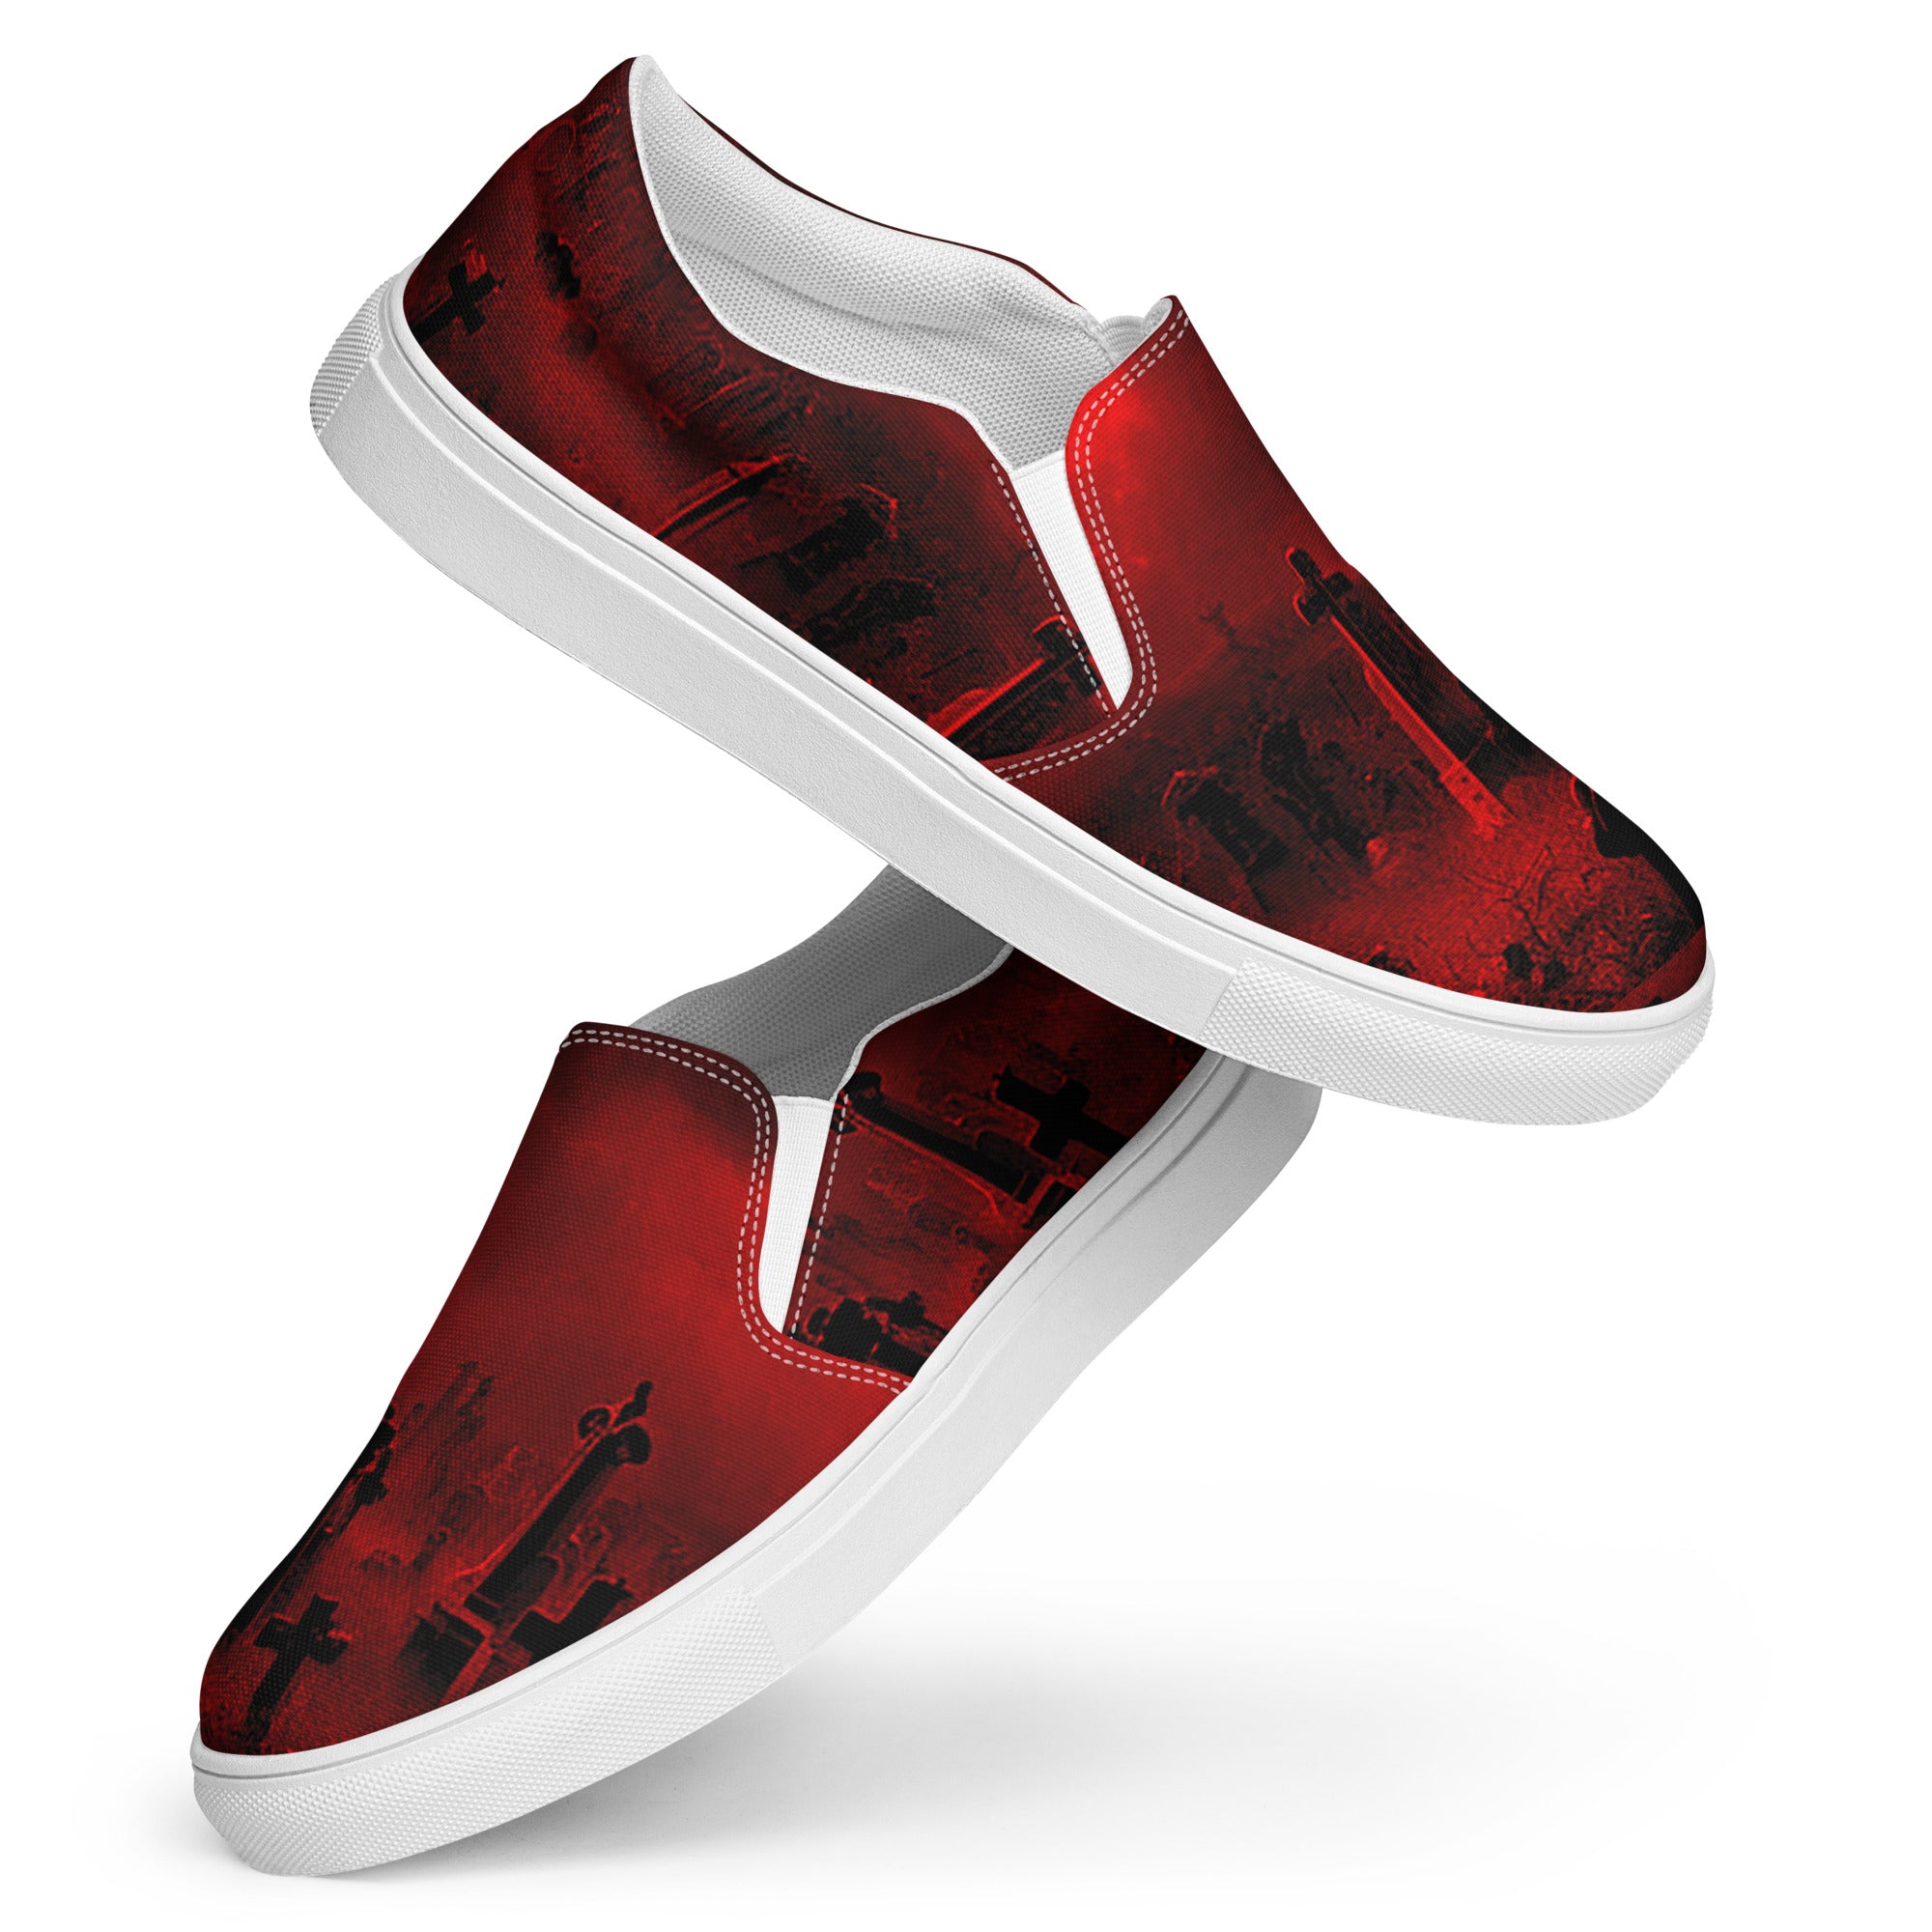 Blood Red Cemetery Tombstone Graveyard Scene Men’s slip-on canvas shoes